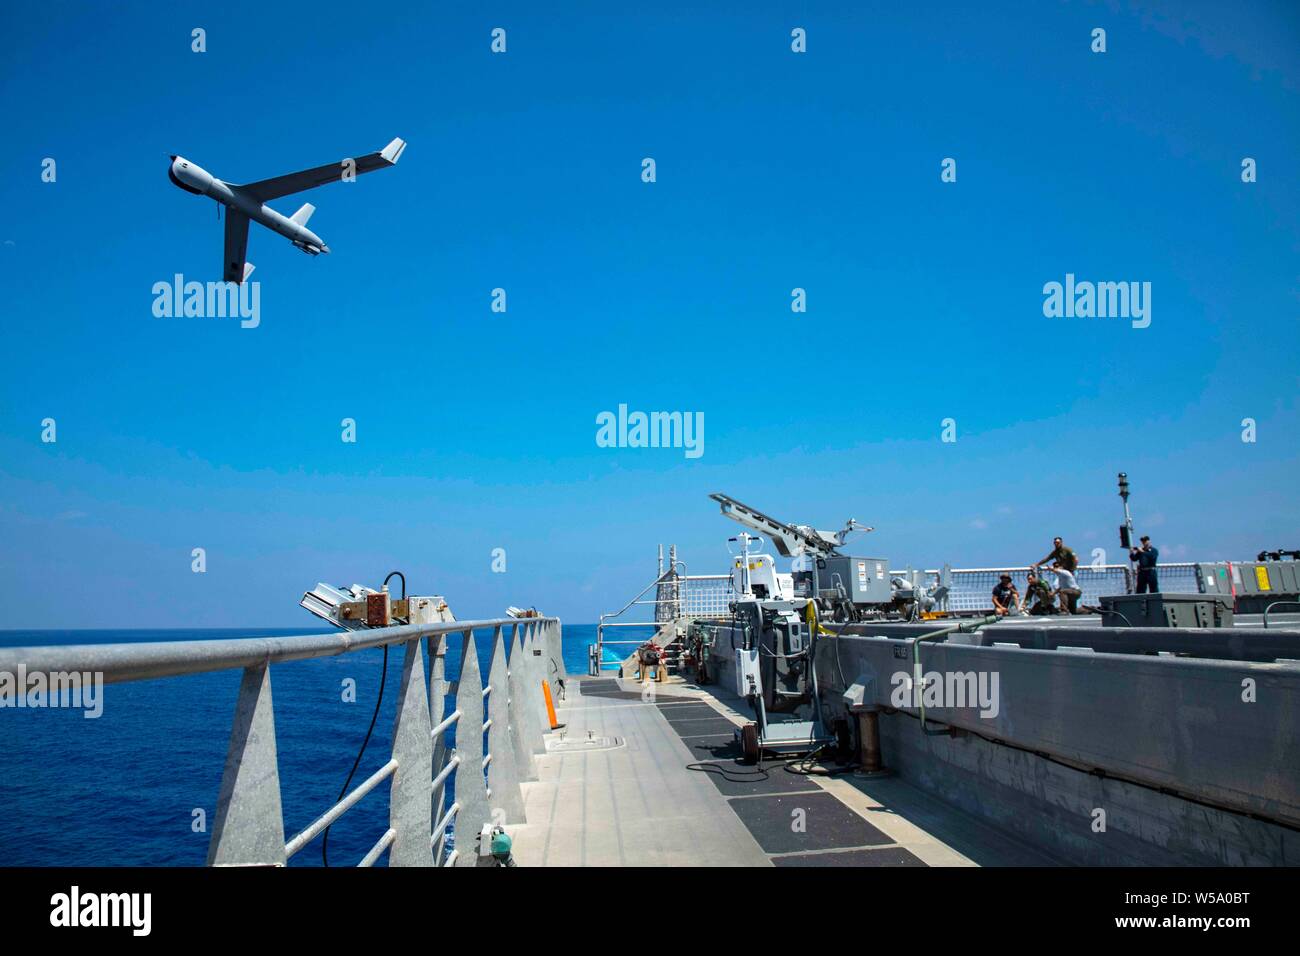 190724-N-AK002-1029  ATLANTIC OCEAN (July 24, 2019) A MK 4 launcher launches a Scan Eagle unmanned aerial vehicle (UAV) from the flight deck of the expeditionary fast transport vessel USNS Spearhead (T-EPF 1). Scan Eagle unmanned aerial system provides improved detection and monitoring to support counter-narcotics missions in the Caribbean and Eastern Pacific. (U.S. Navy photo by Master-at-Arms 1st Class Alexander Knapp/Released) Stock Photo